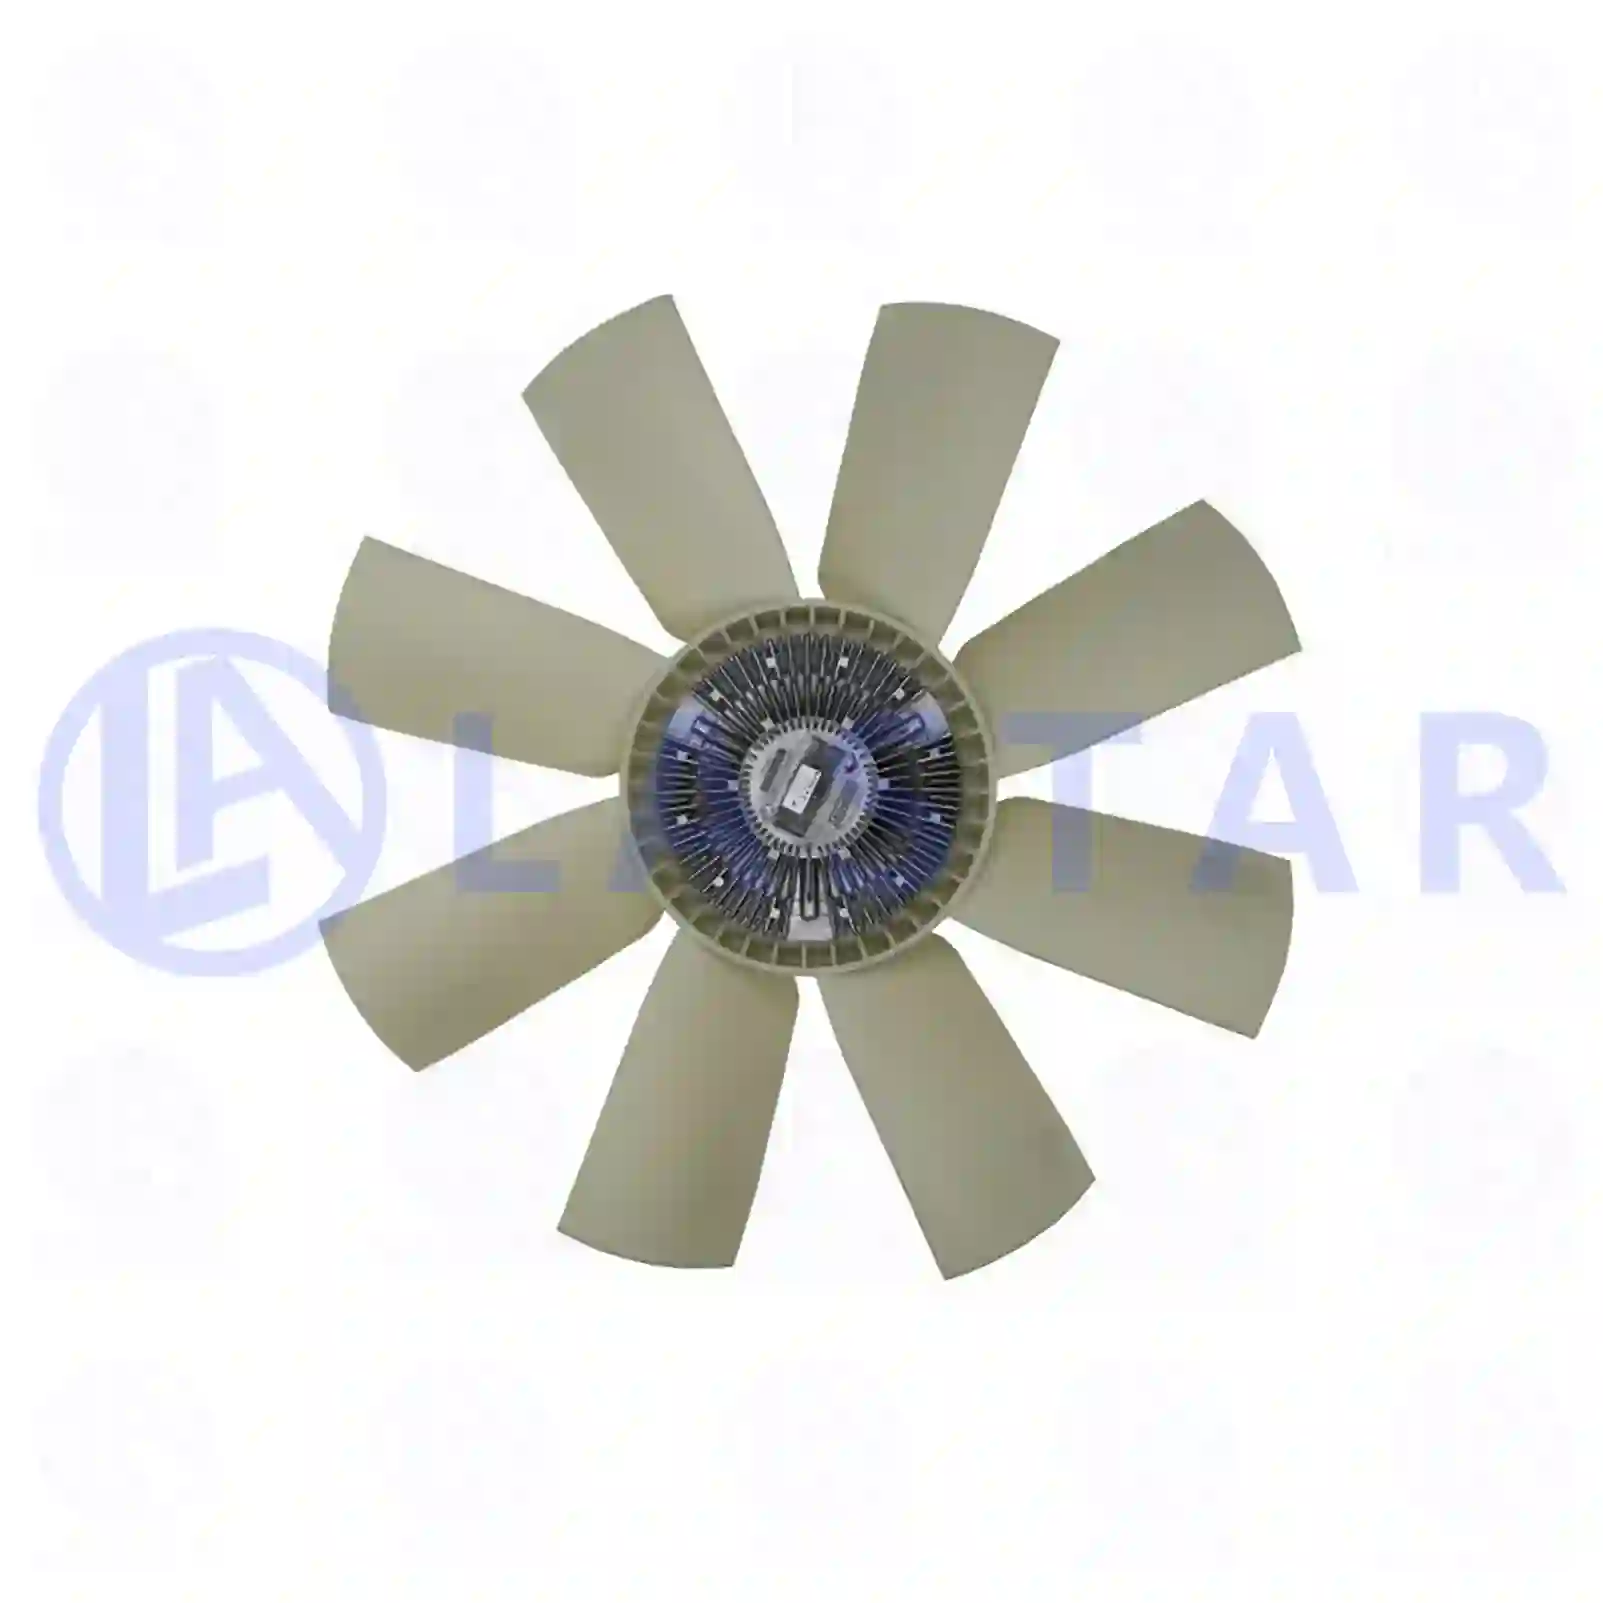 Fan with clutch, 77709353, 1675036, 1675048, 8112552, 8112950, 8149394 ||  77709353 Lastar Spare Part | Truck Spare Parts, Auotomotive Spare Parts Fan with clutch, 77709353, 1675036, 1675048, 8112552, 8112950, 8149394 ||  77709353 Lastar Spare Part | Truck Spare Parts, Auotomotive Spare Parts